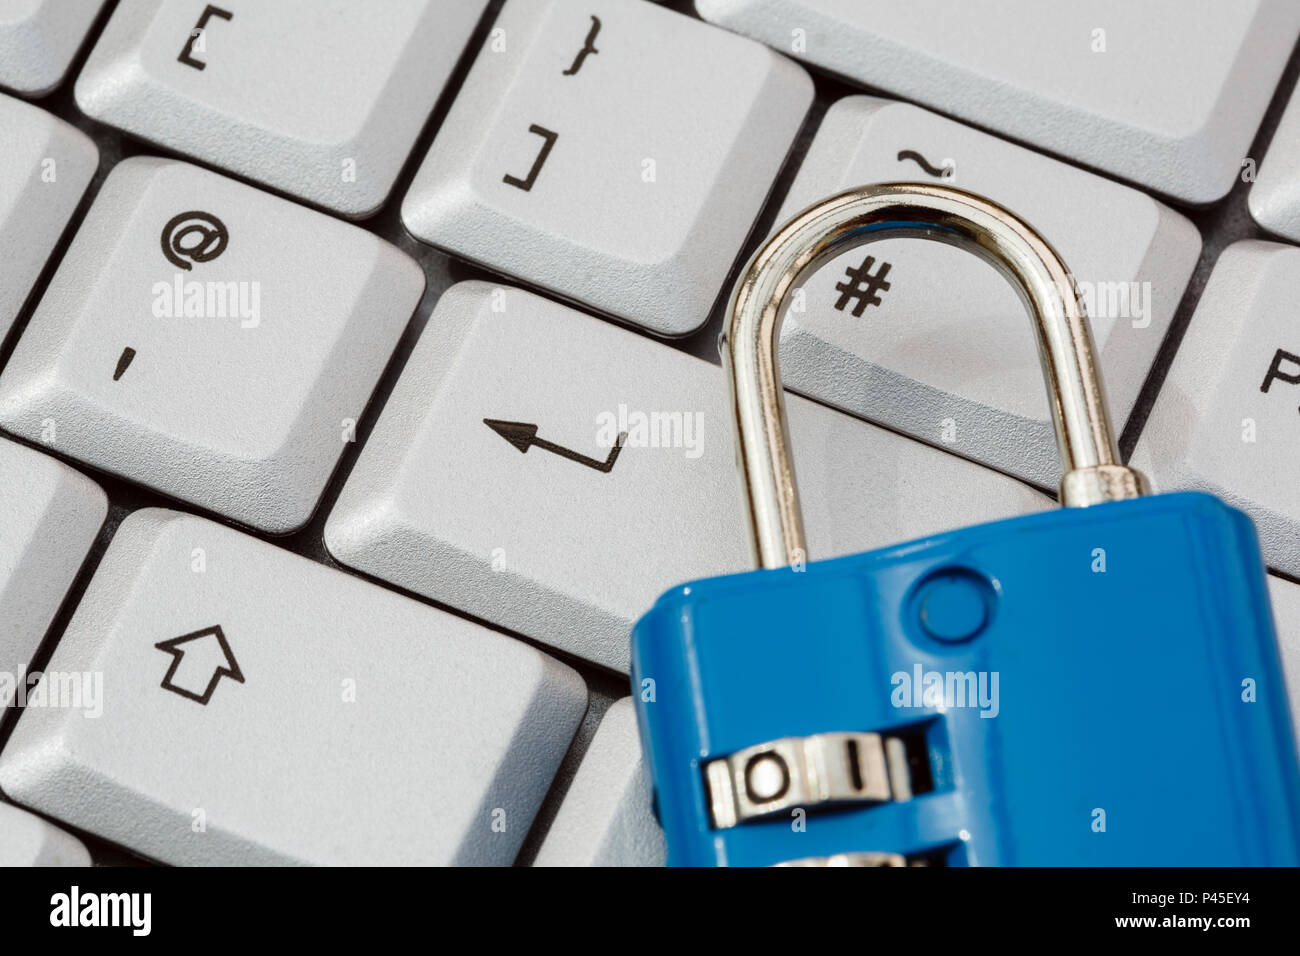 A keyboard with enter key and a padlock to illustrate online cyber security and data protection GDPR concept. England UK Britain Stock Photo